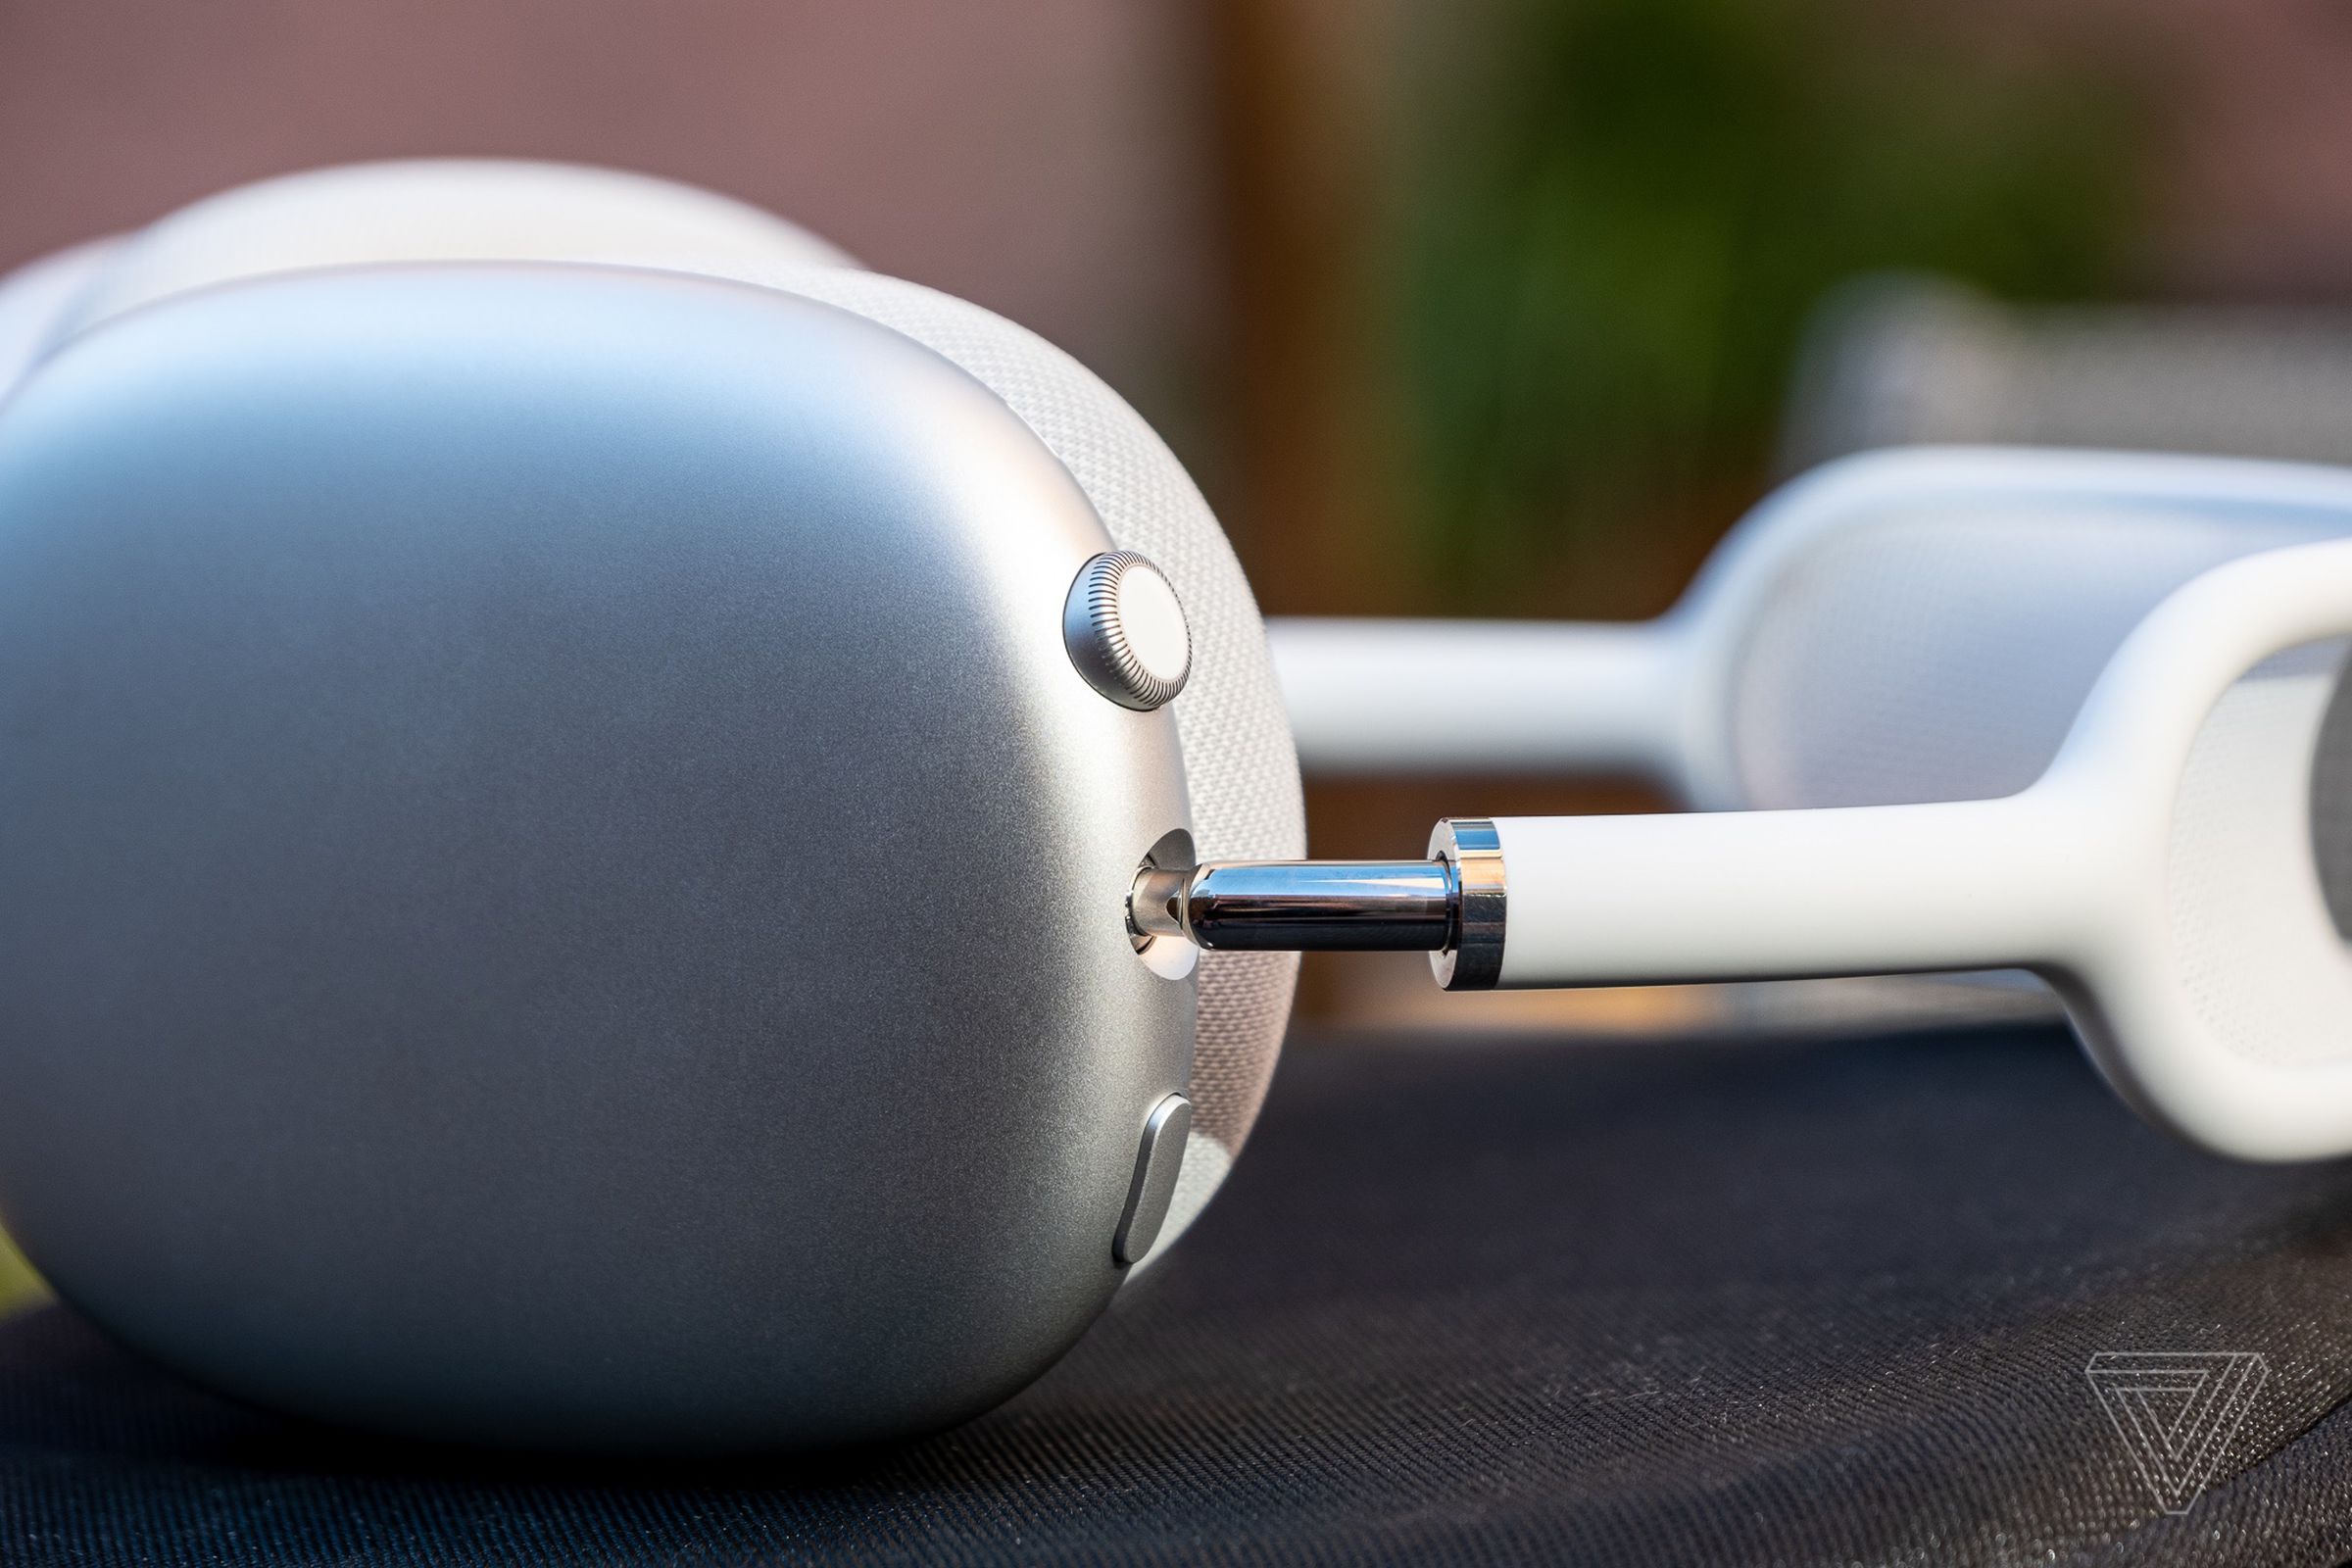 A close-up shot of the Digital Crown on a silver pair of Apple’s AirPods Max headphones.